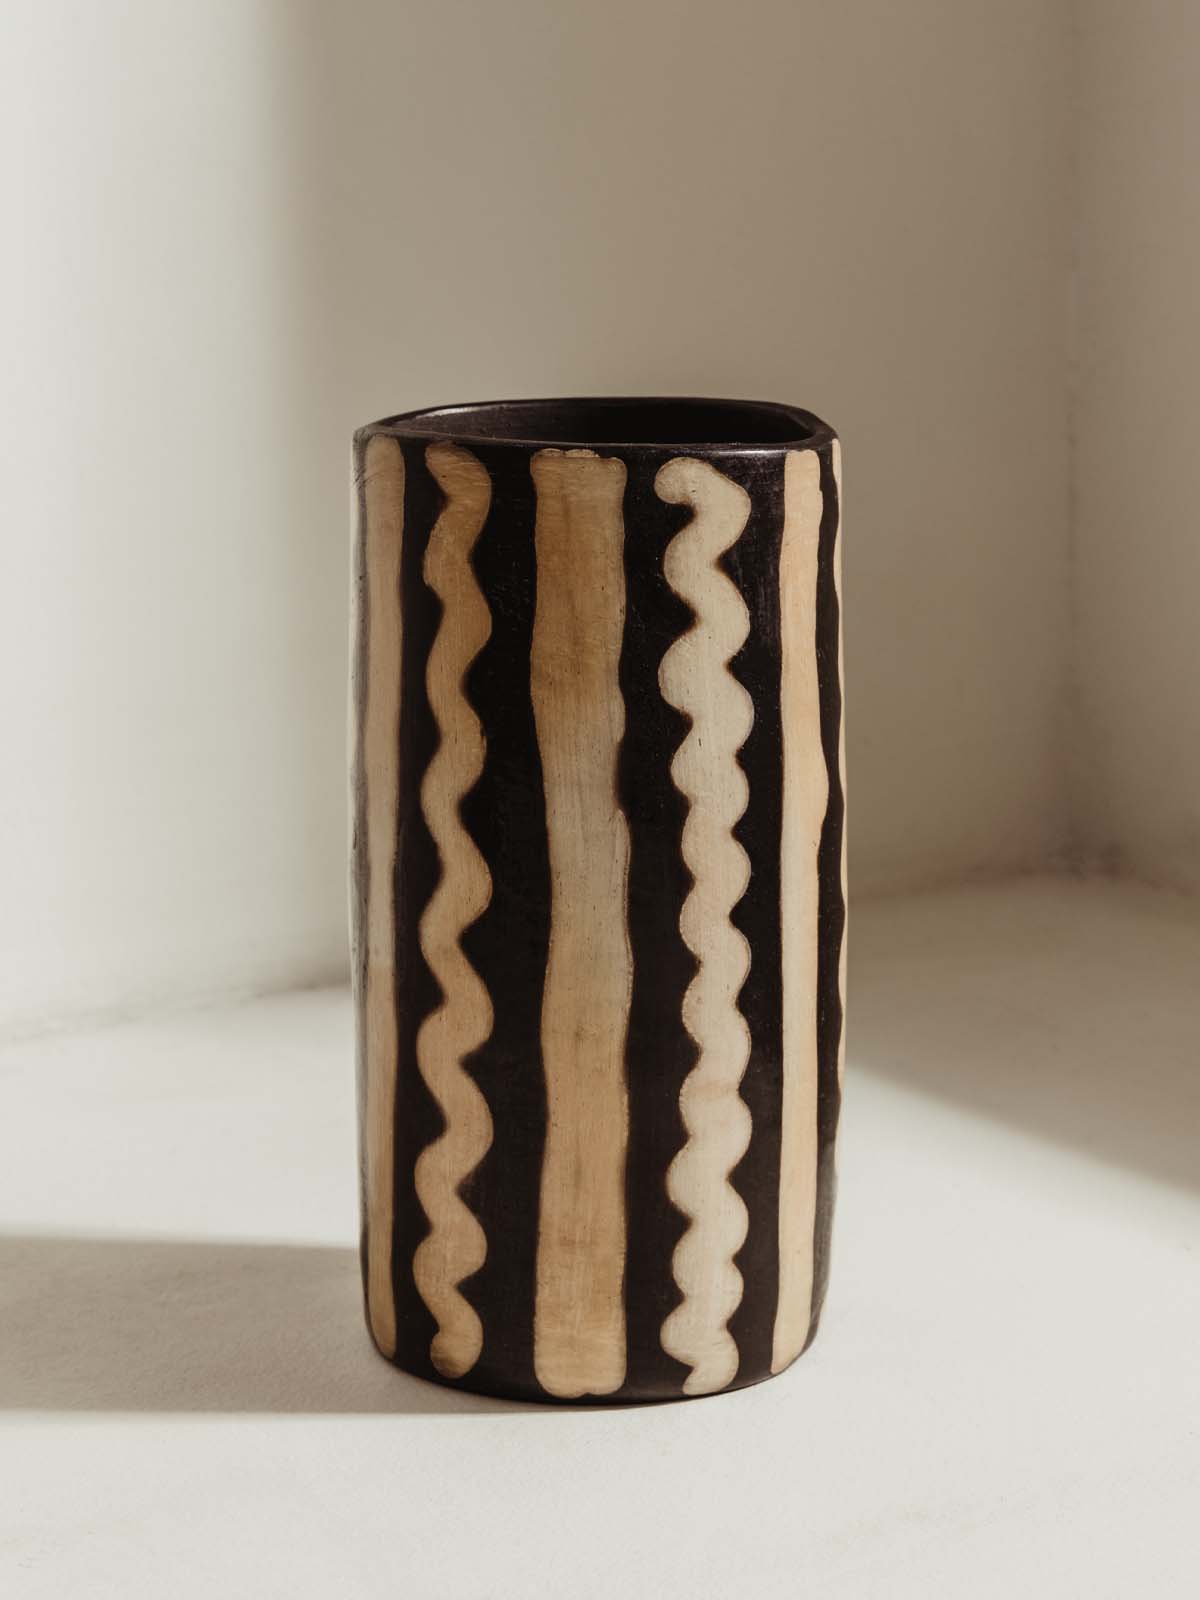 Tall black and white vase with abstract line pattern in white.